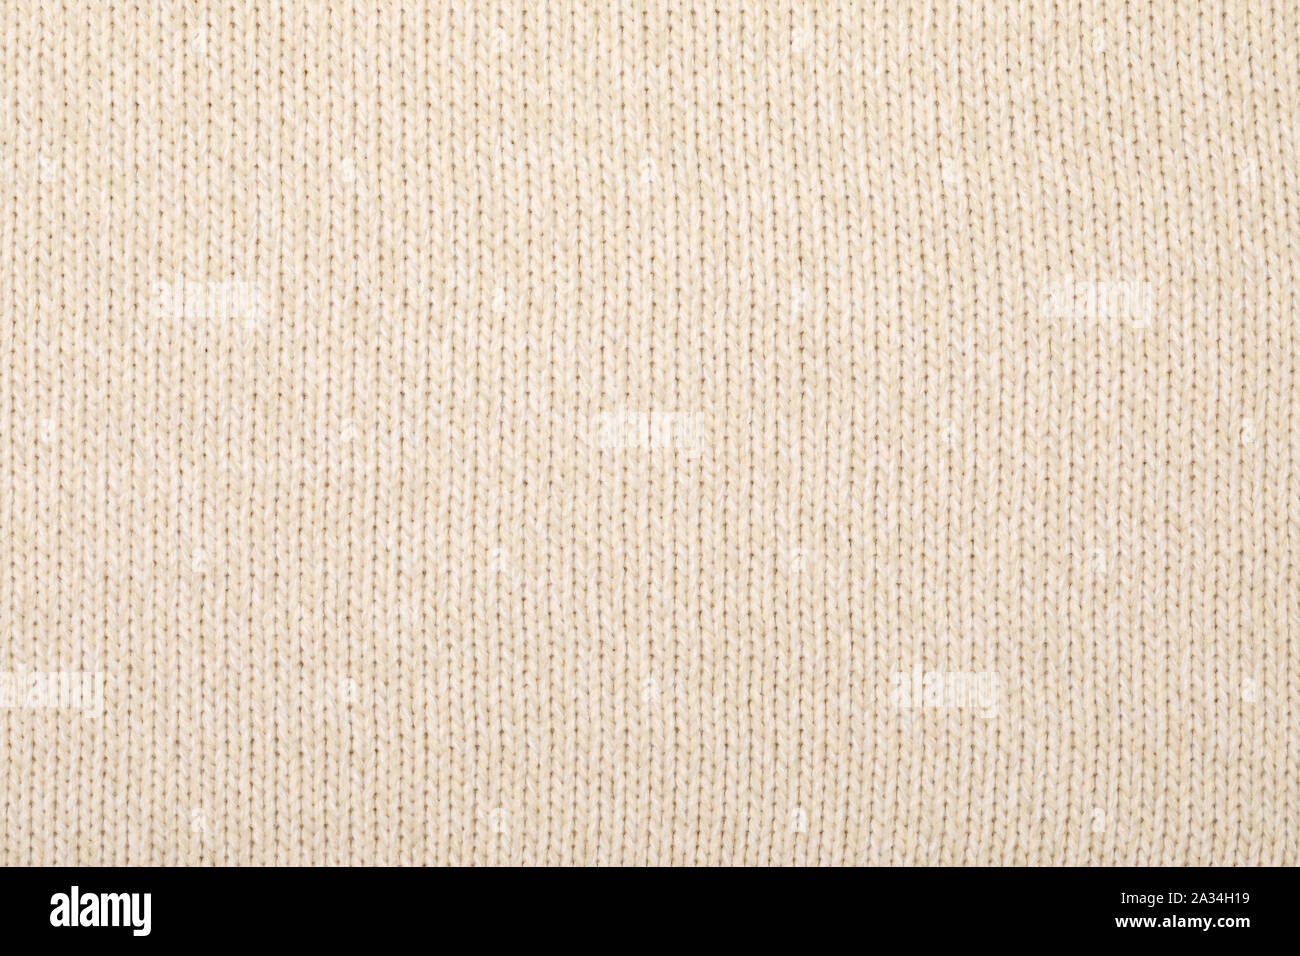 Real beige melange or ombre knitted fabric with ornamental pattern